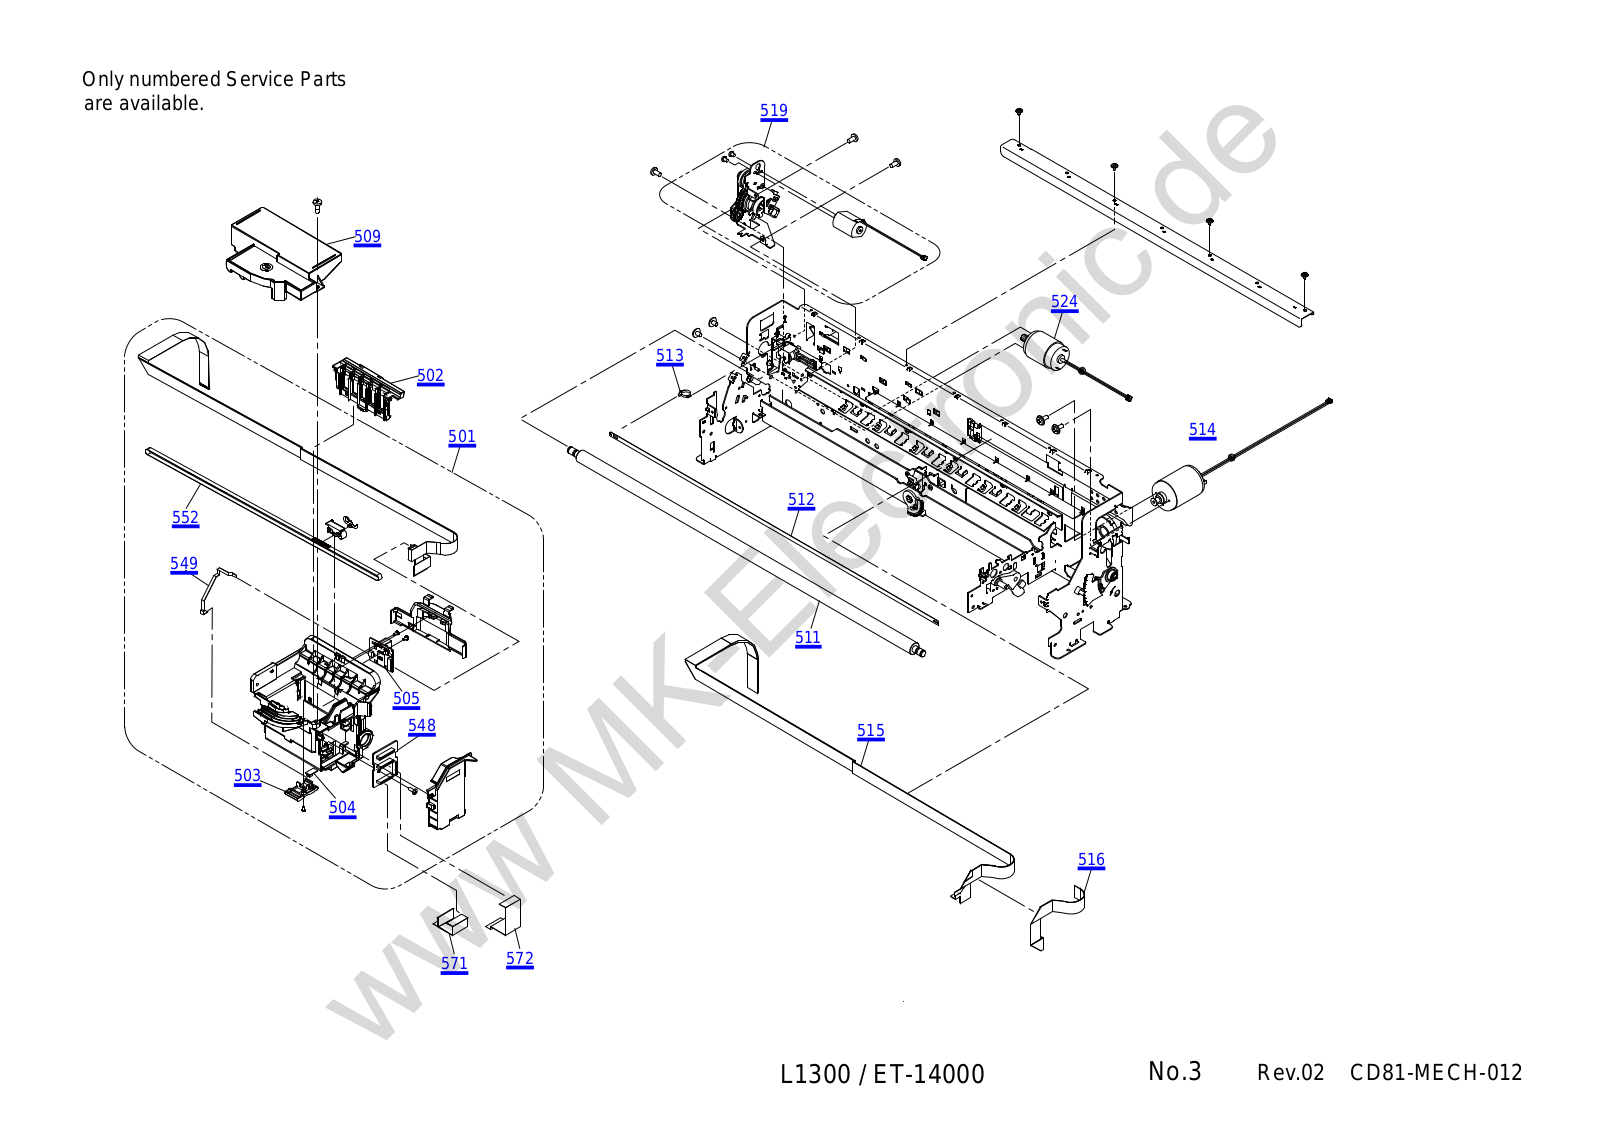 Epson L1800 Exploded Diagrams 6 9570